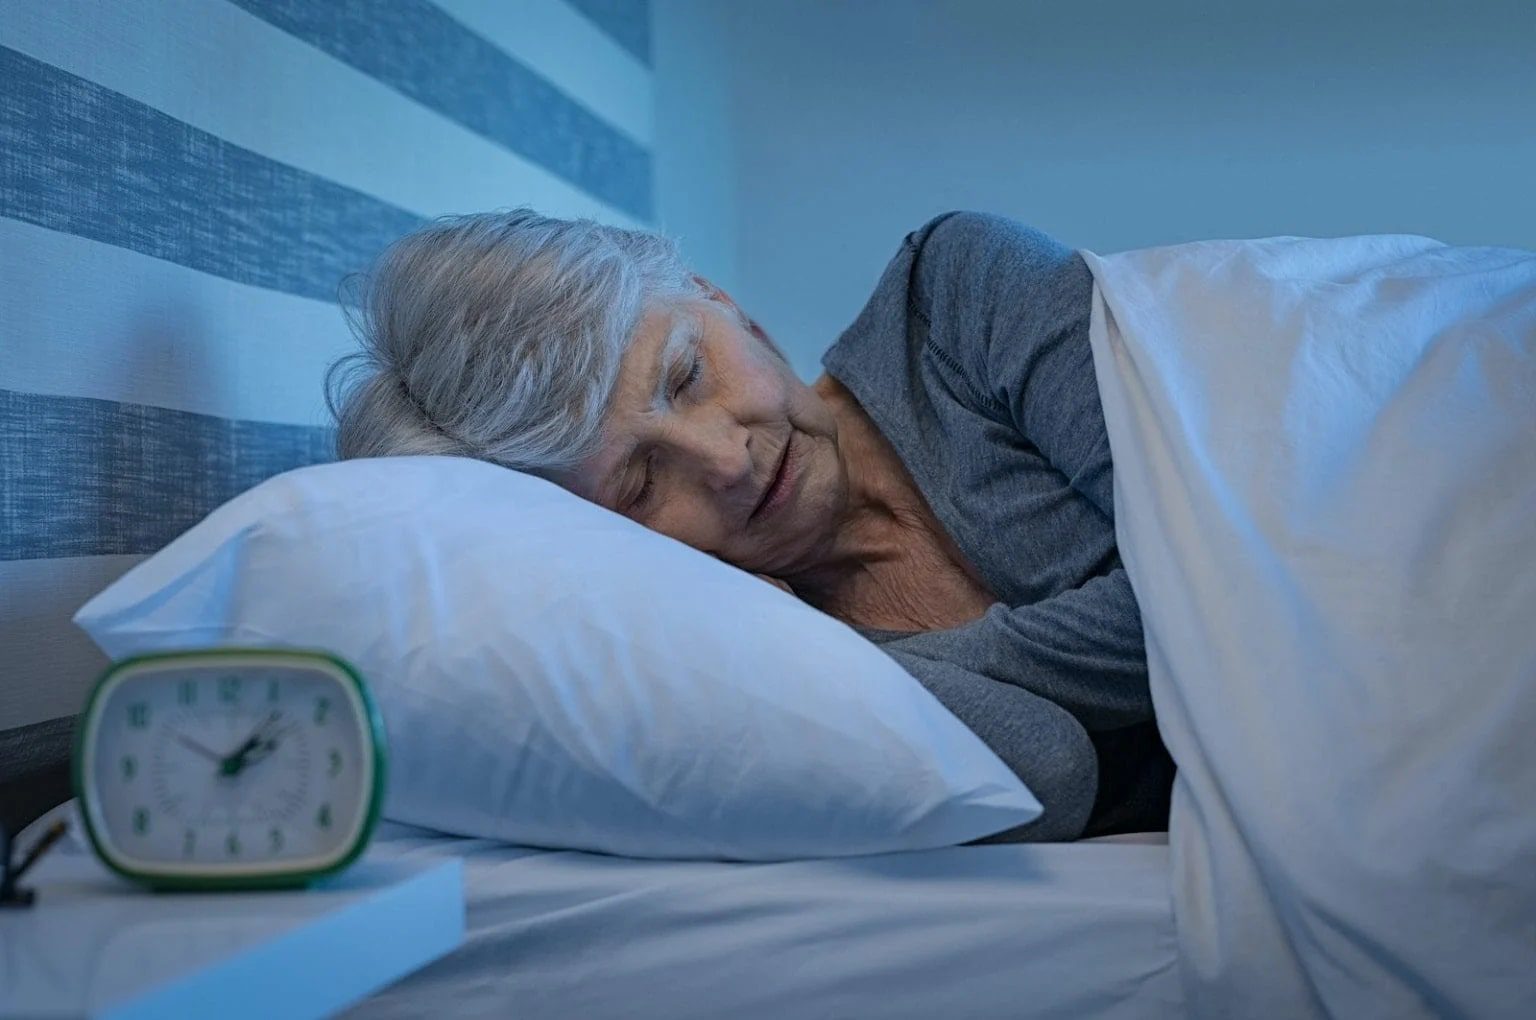 Taking more rest in old age does harm instead of benefit